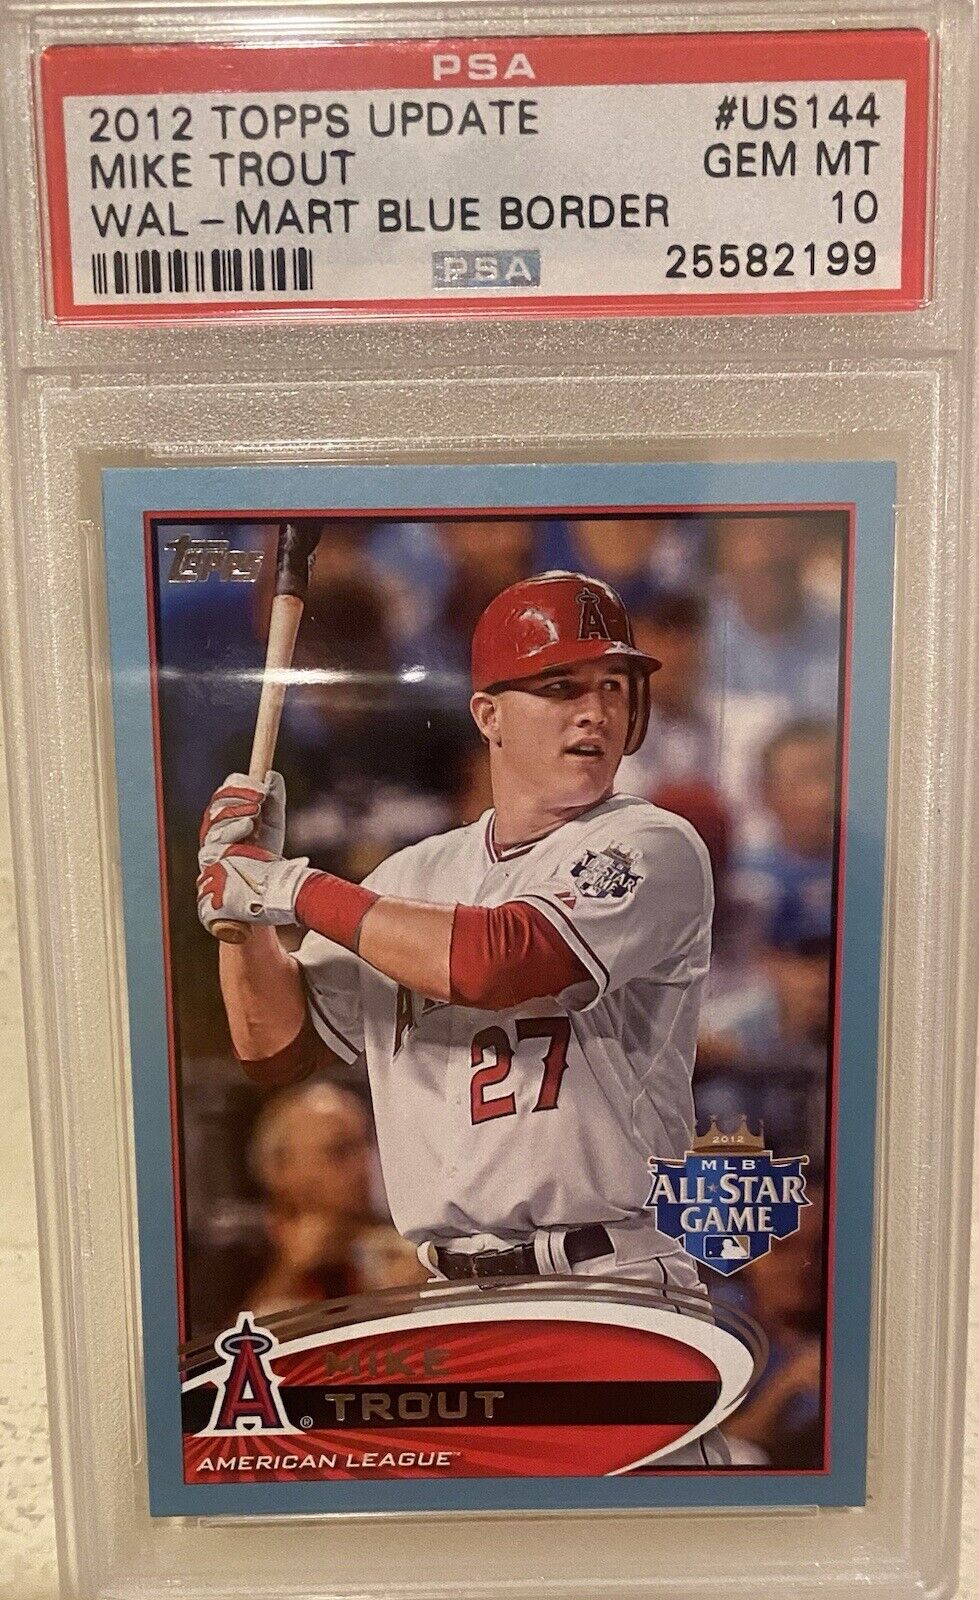 MIKE TROUT PSA 10! 2012 Topps Update Wal-Mart Blue Border #US144